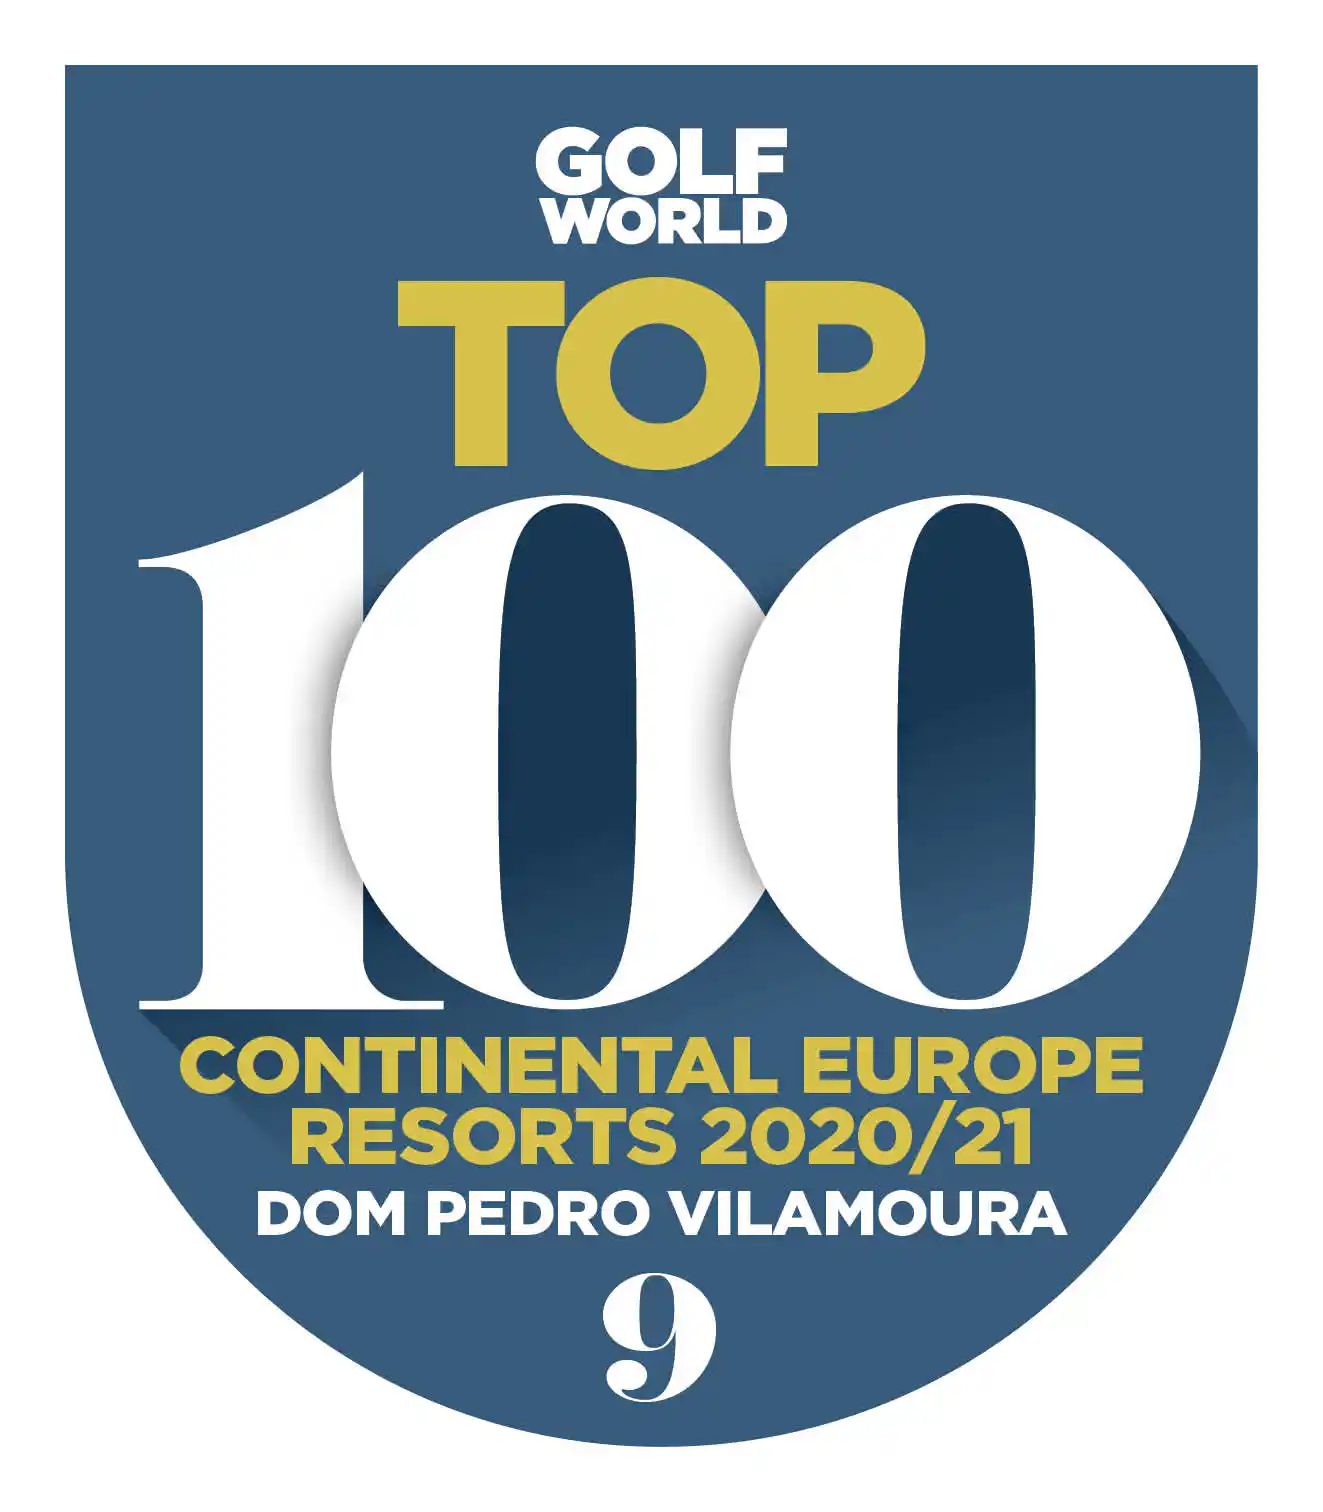 TOP 100 Continental Europe Resorts 2020/2021: 9th place